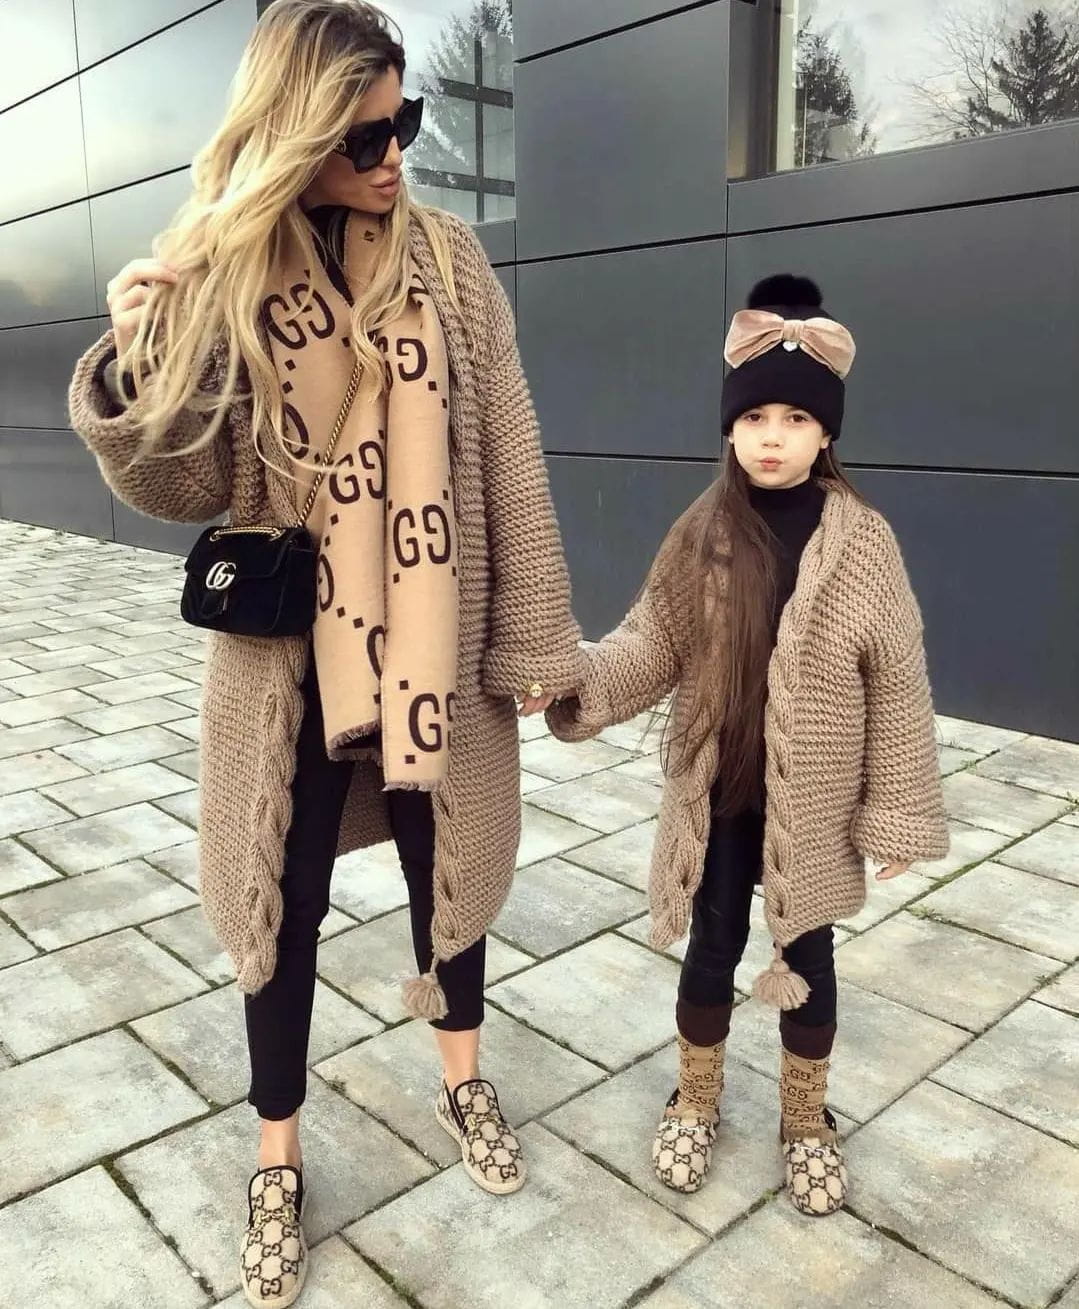 Best Casual Winter Outfit Ideas For Women images 25